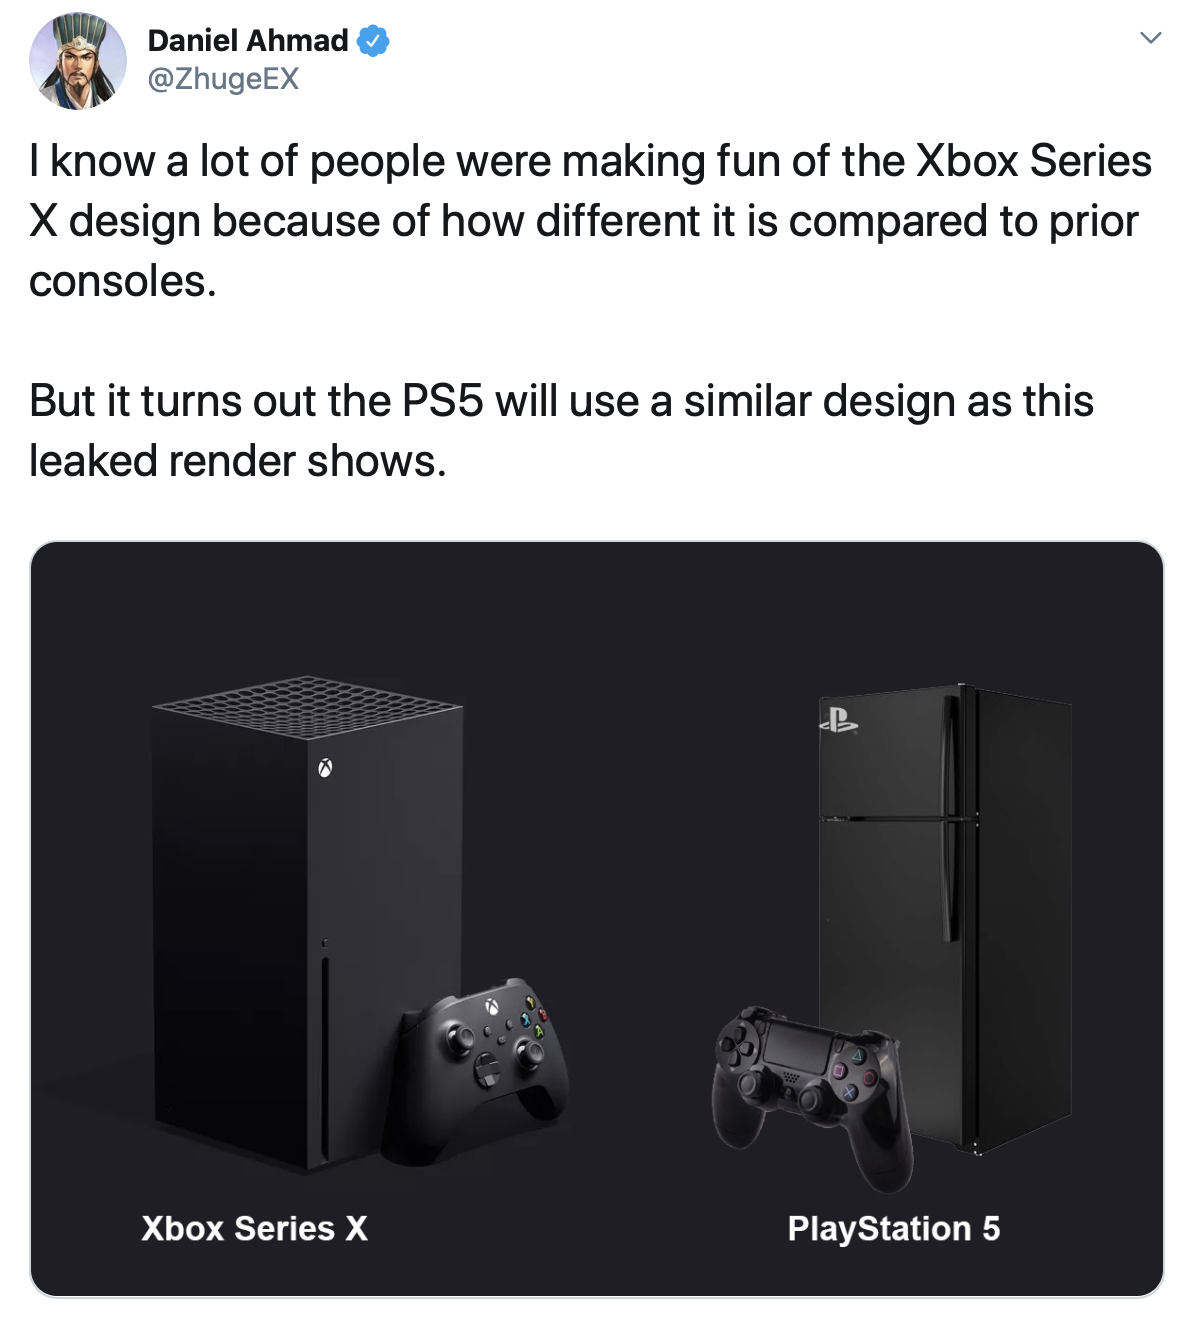 xbox series x gaming memes - Daniel Ahmad I know a lot of people were making fun of the Xbox Series X design because of how different it is compared to prior consoles. But it turns out the PS5 will use a similar design as this leaked render shows. Xbox Se